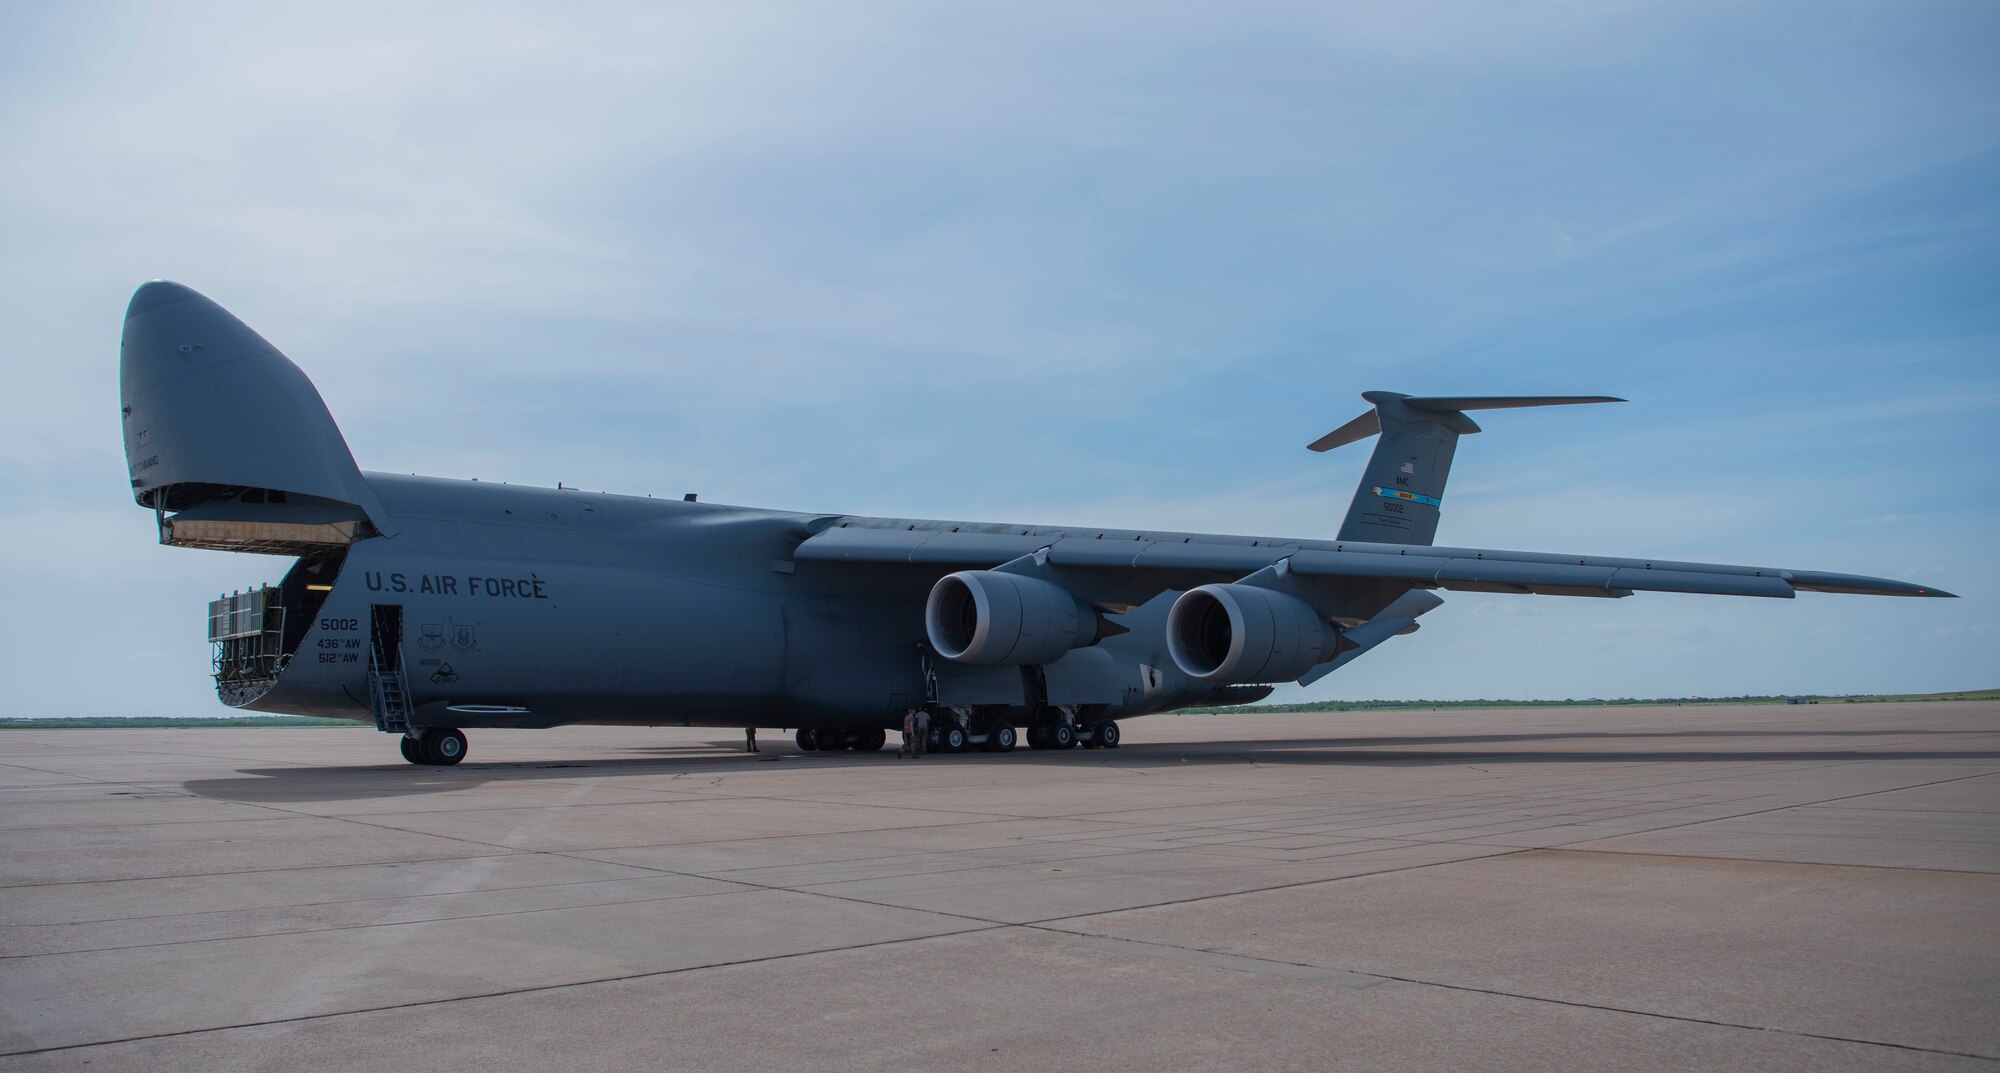 A C-5 Galaxy assigned to Dover Air Force Base, Delaware, is parked on the flightline at Dyess AFB, Texas, April 27, 2020. The C-5 transported Bomber Task Force equipment for four B-1B Lancers and approximately 200 Airmen to Andersen AFB, Guam. The BTF supports Pacific Air Forces' training efforts with allies, partners and joint forces; and strategic deterrence mission to reinforce the rules-based international order in the Indo-Pacific region (U.S. Air Force photo by Airman 1st Class Nicole Molignano)